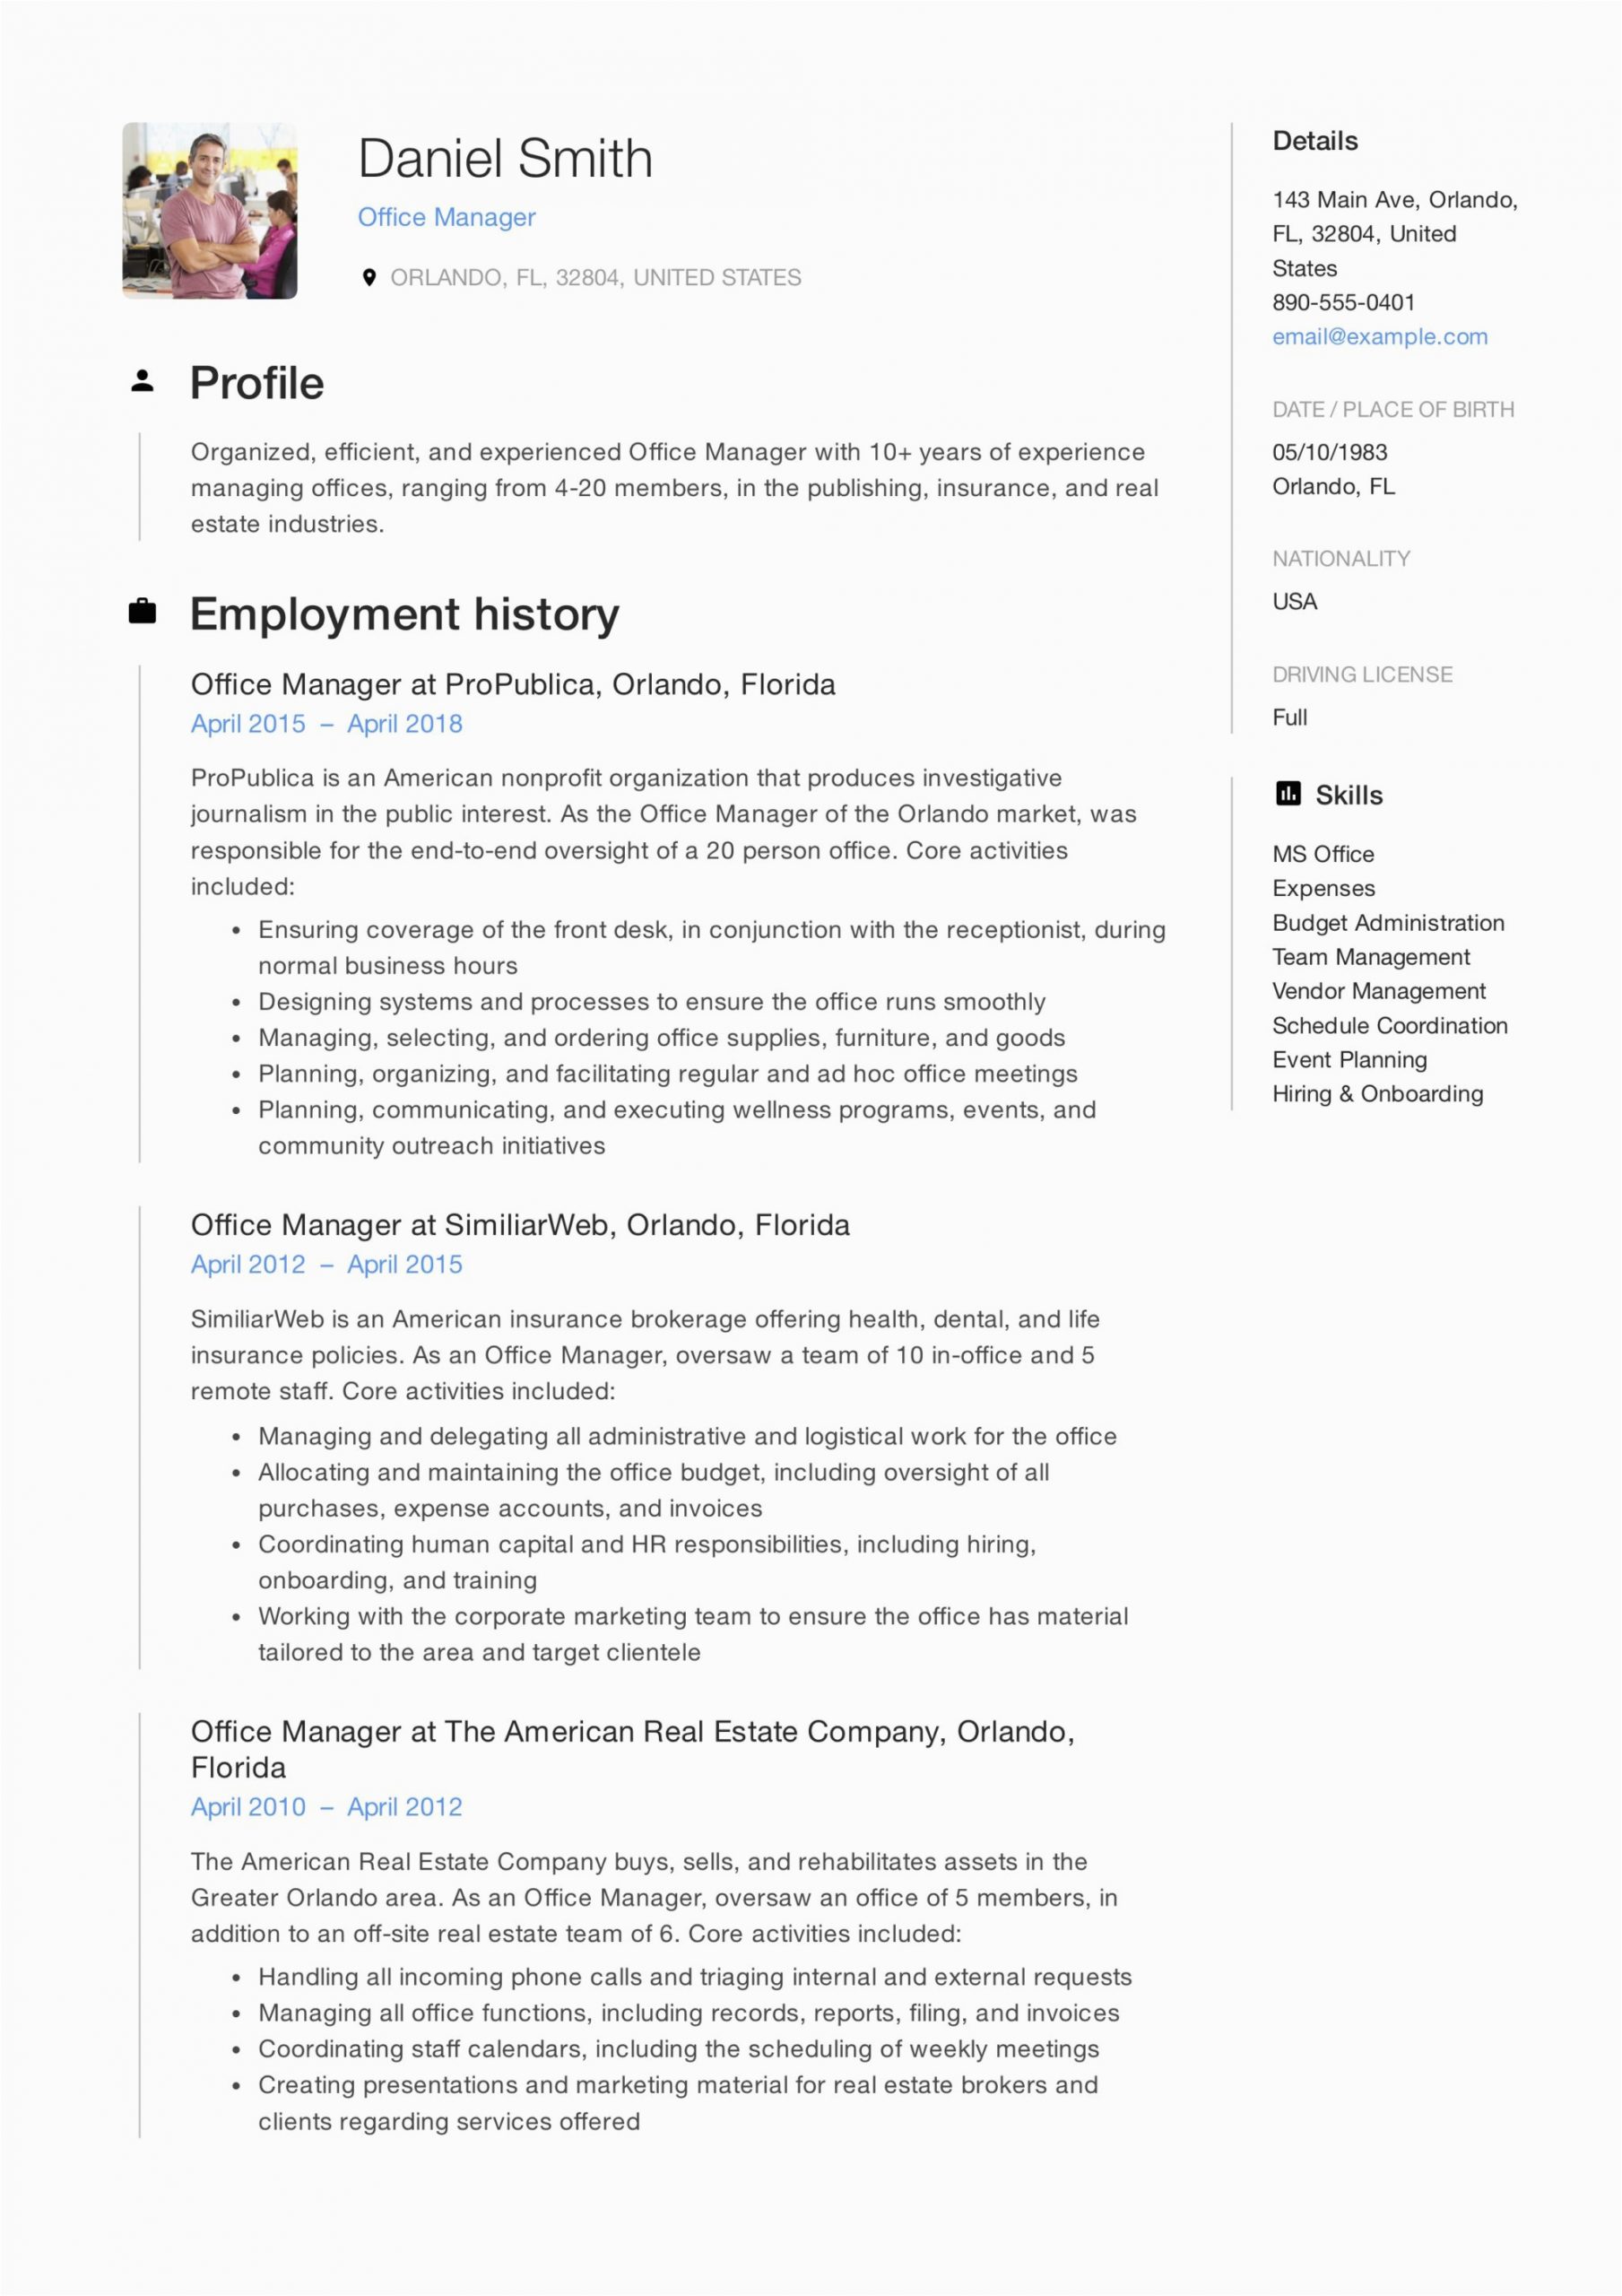 Professional Summary Resume Sample for Manager Fice Manager Resume & Guide 12 Samples Pdf